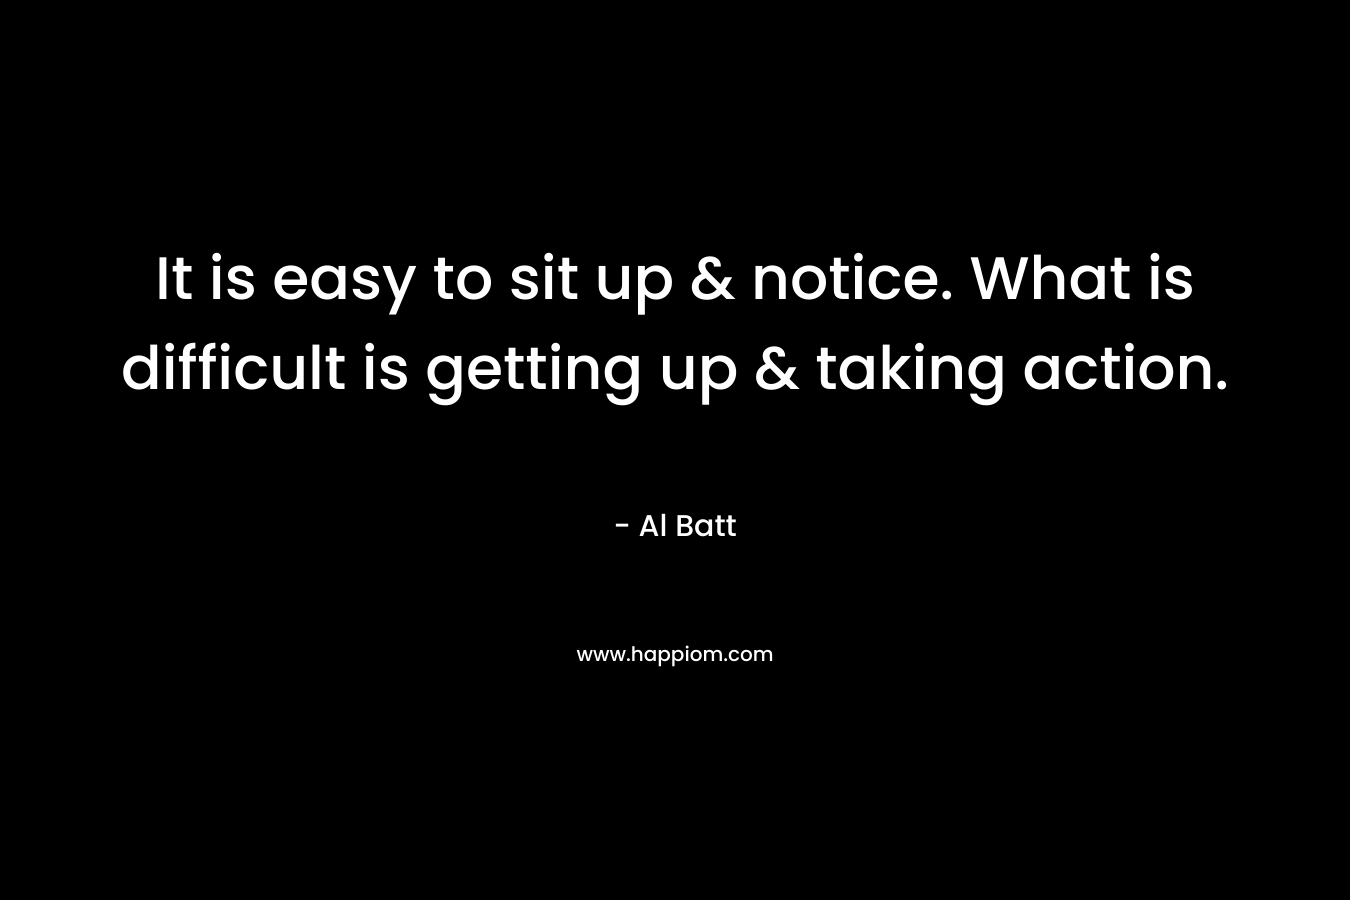 It is easy to sit up & notice. What is difficult is getting up & taking action.